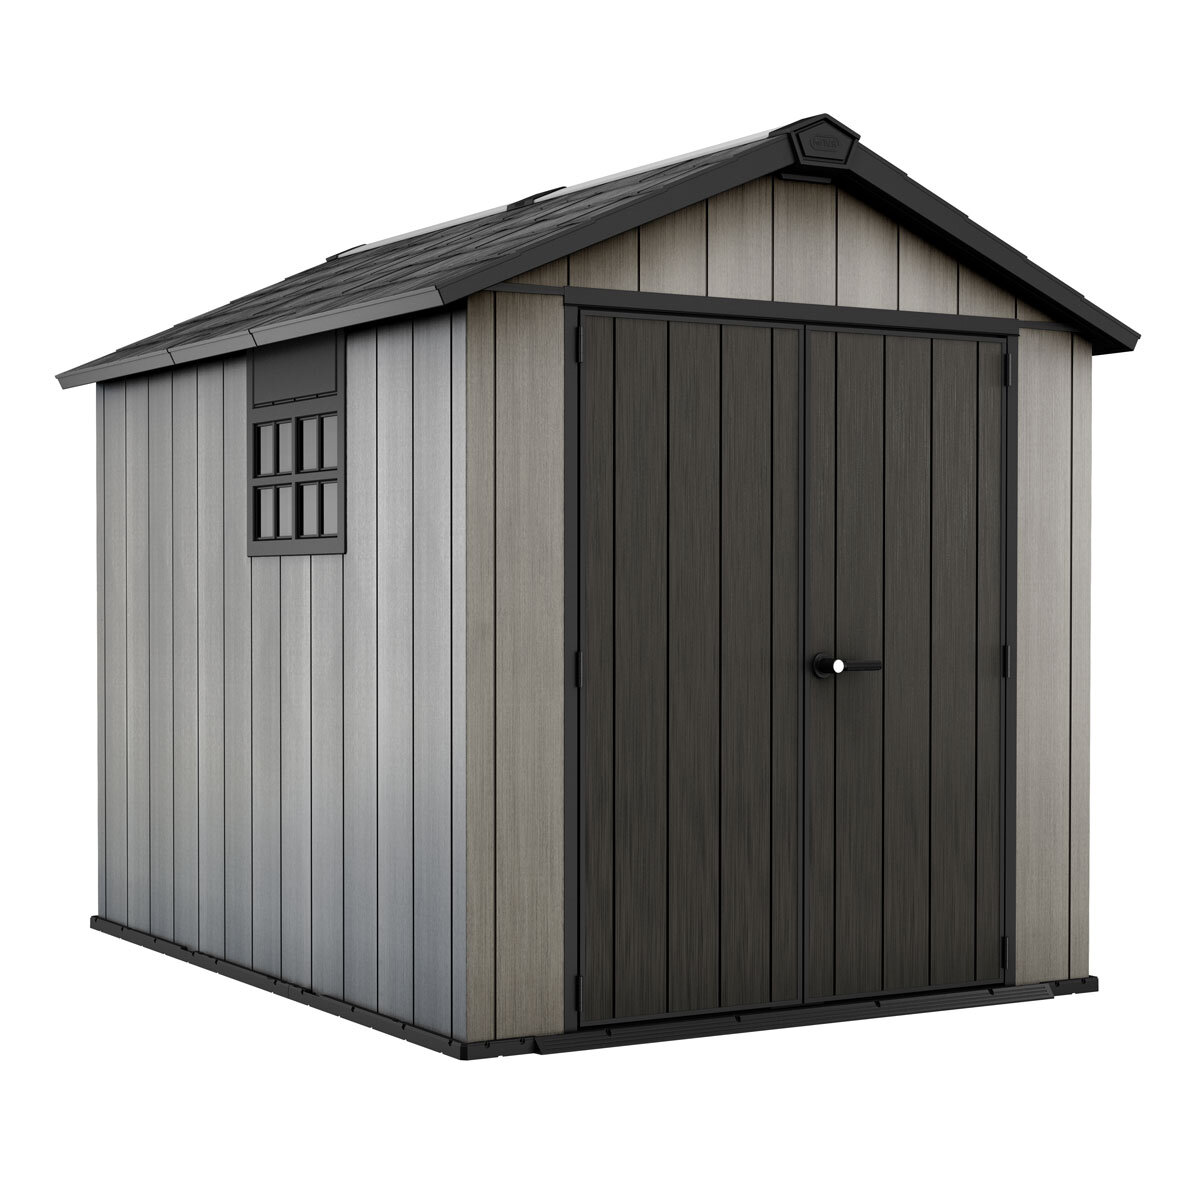 Keter Oakland 7ft 6" x 9ft 4" (2.3 x 2.9m) Storage Shed